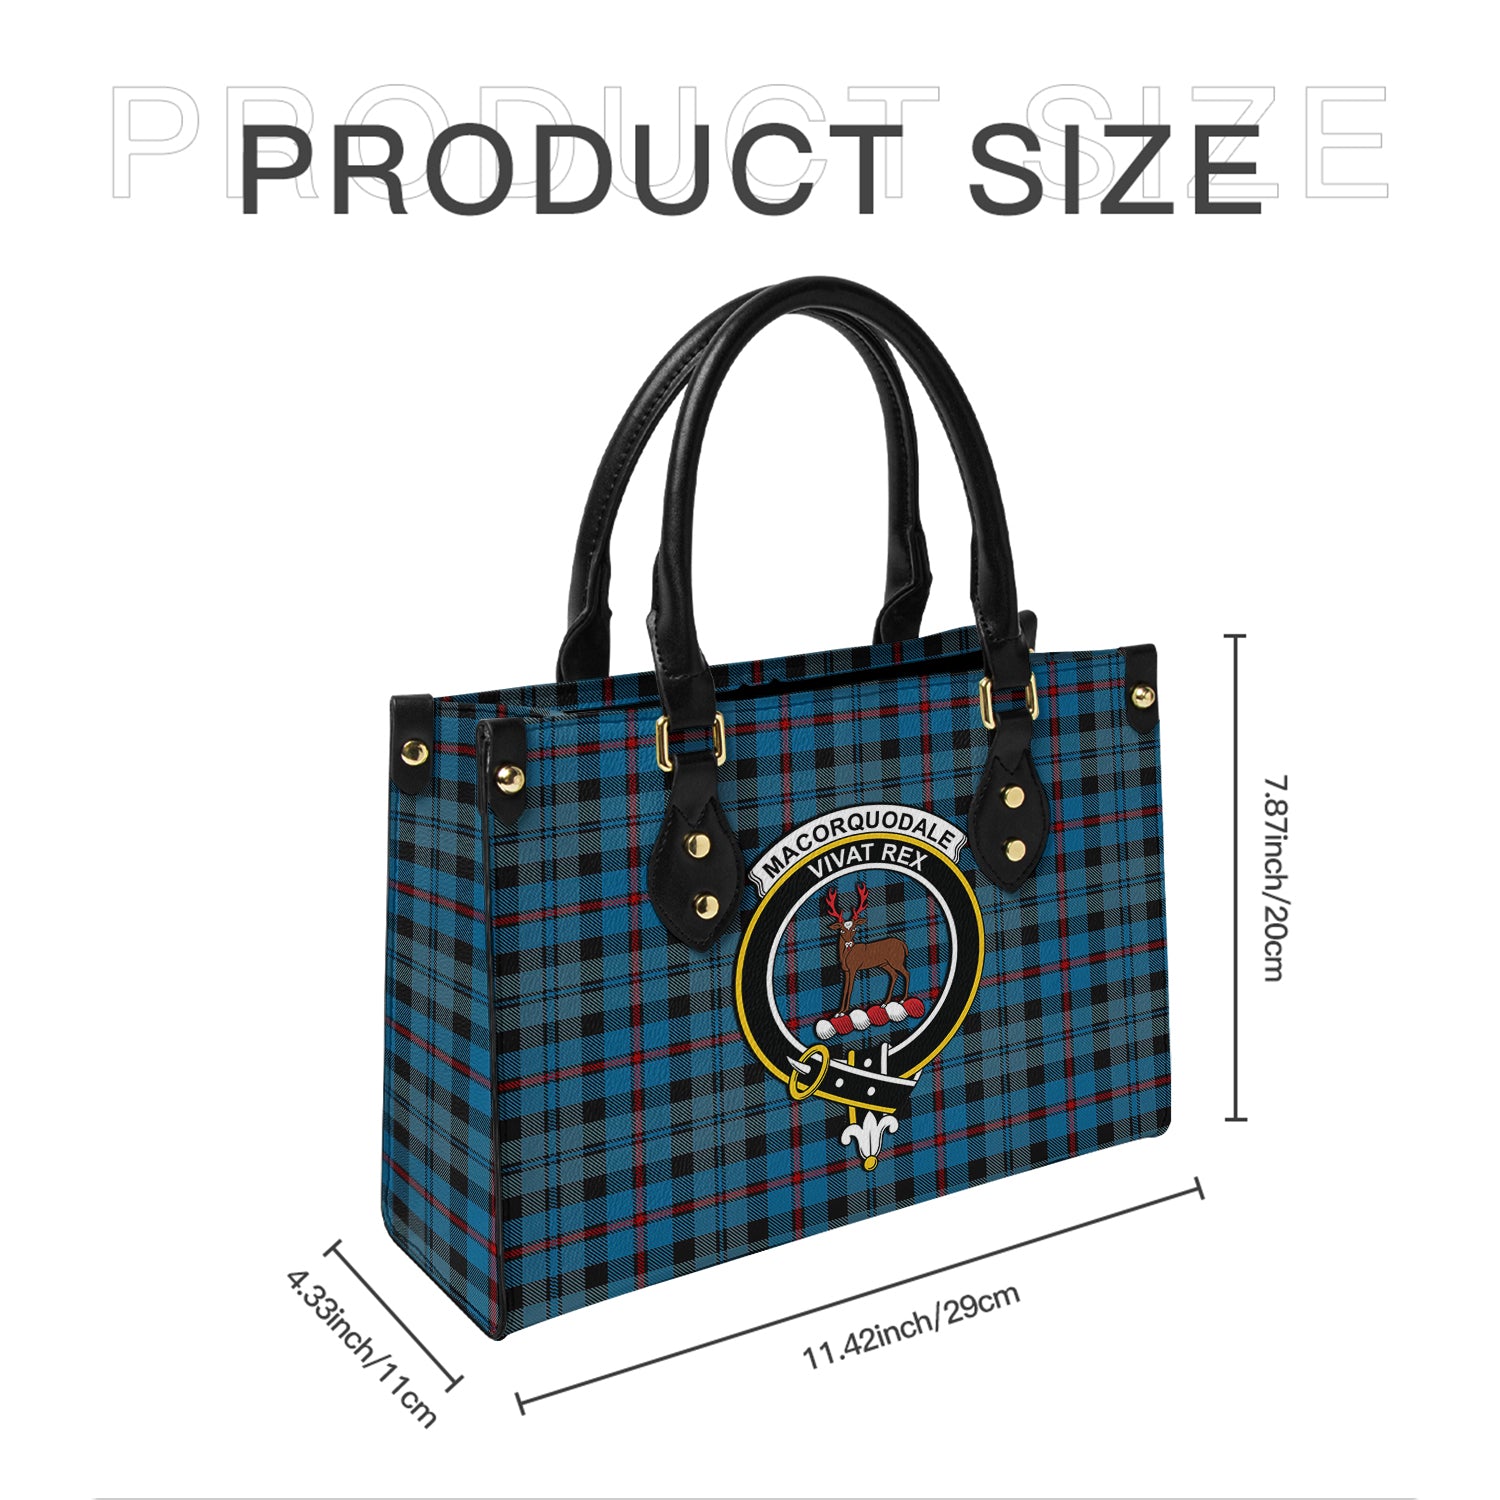 maccorquodale-tartan-leather-bag-with-family-crest